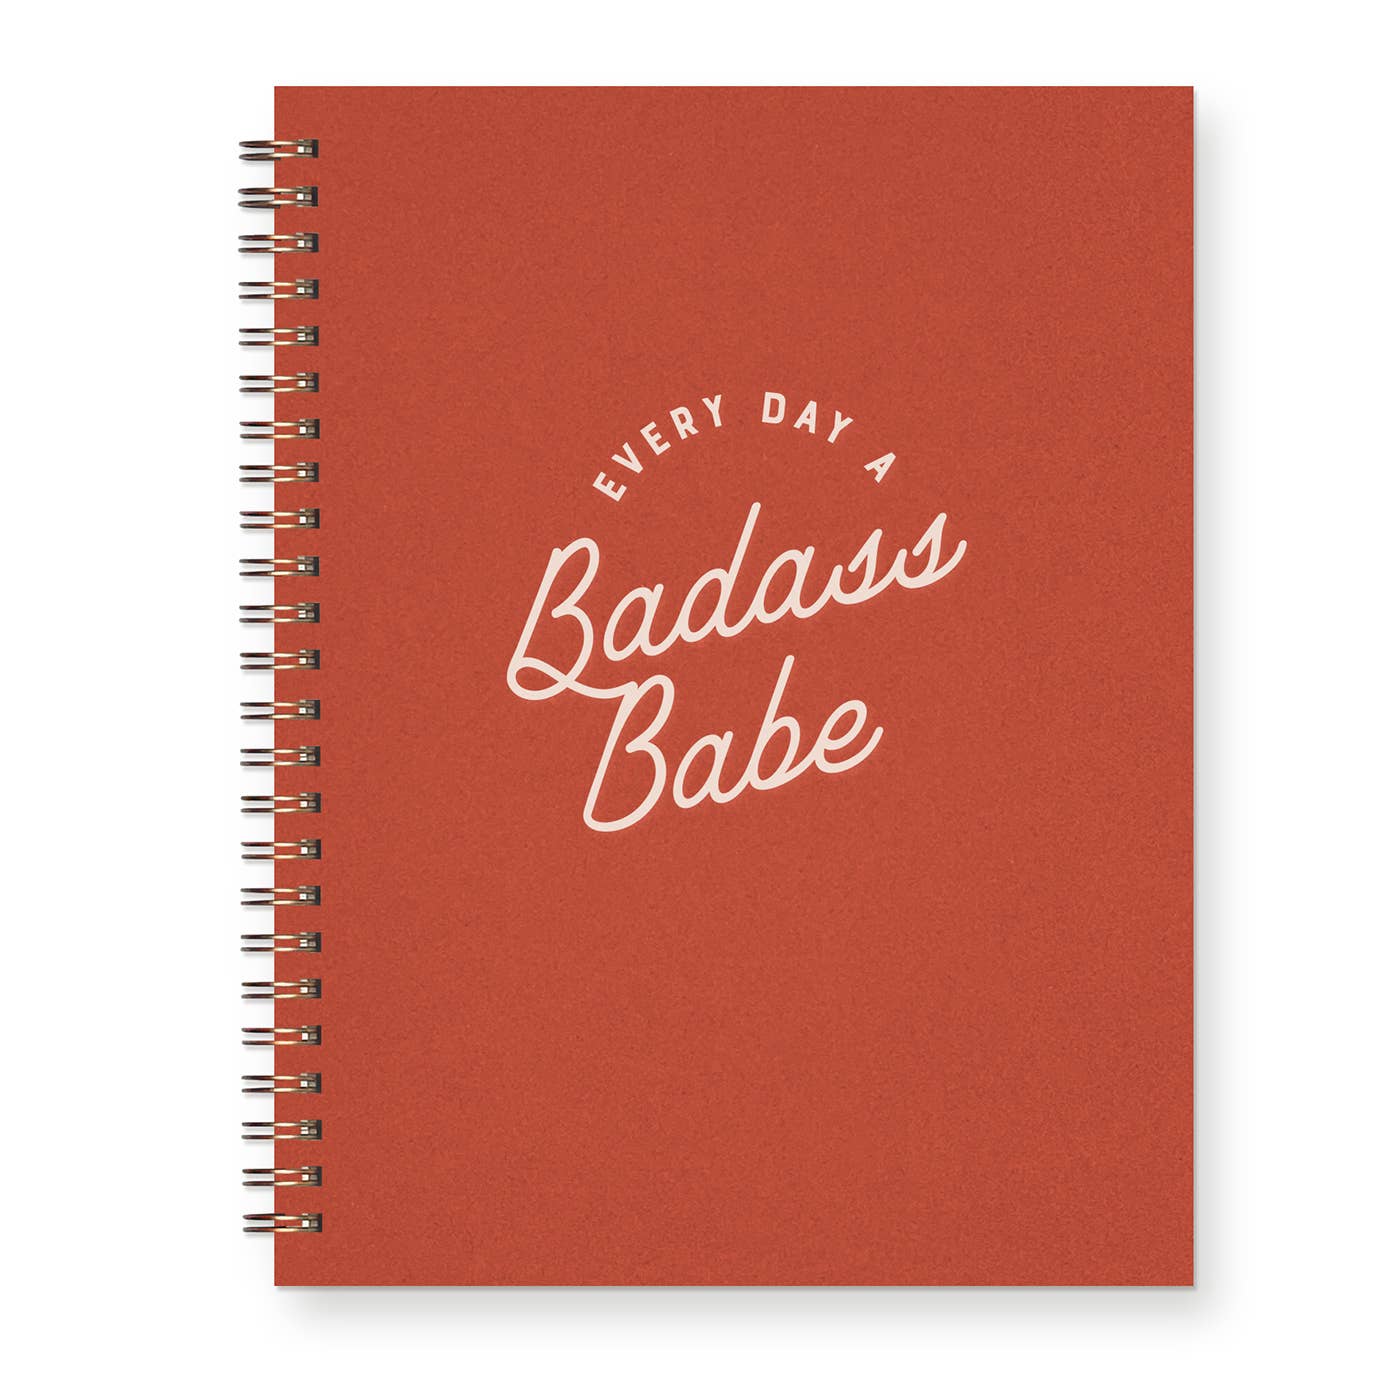 Badass Babe Journal Lined Canyon Red Notebook